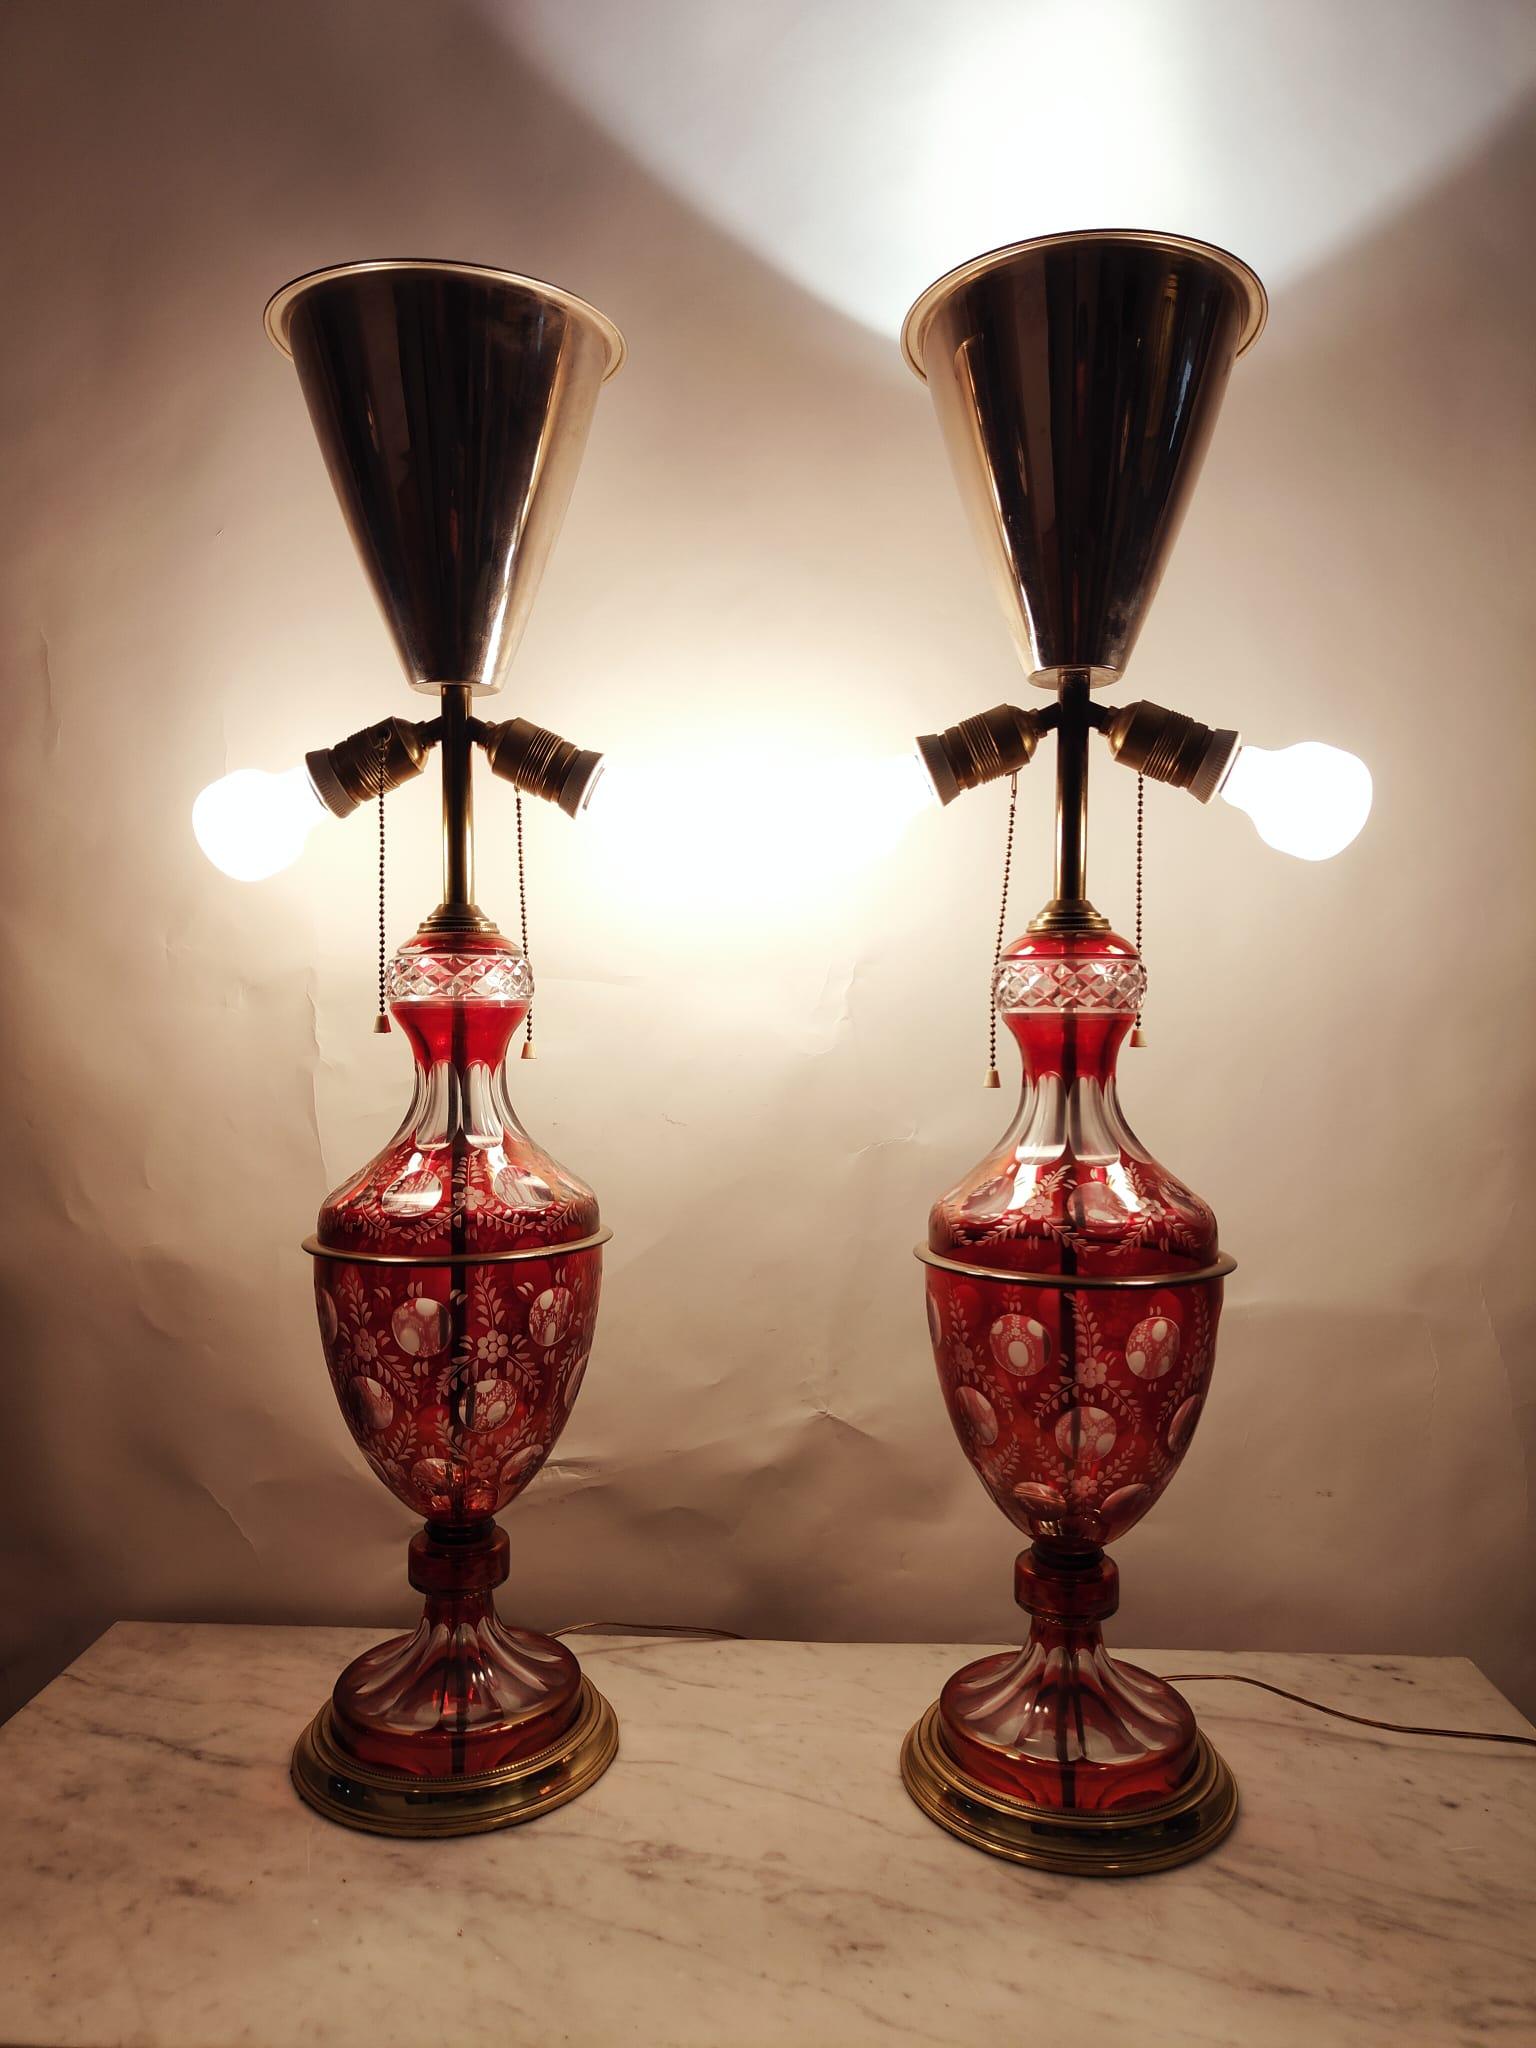 Hand-Crafted Lamps in Cut Glass from 1900, 20th Century For Sale